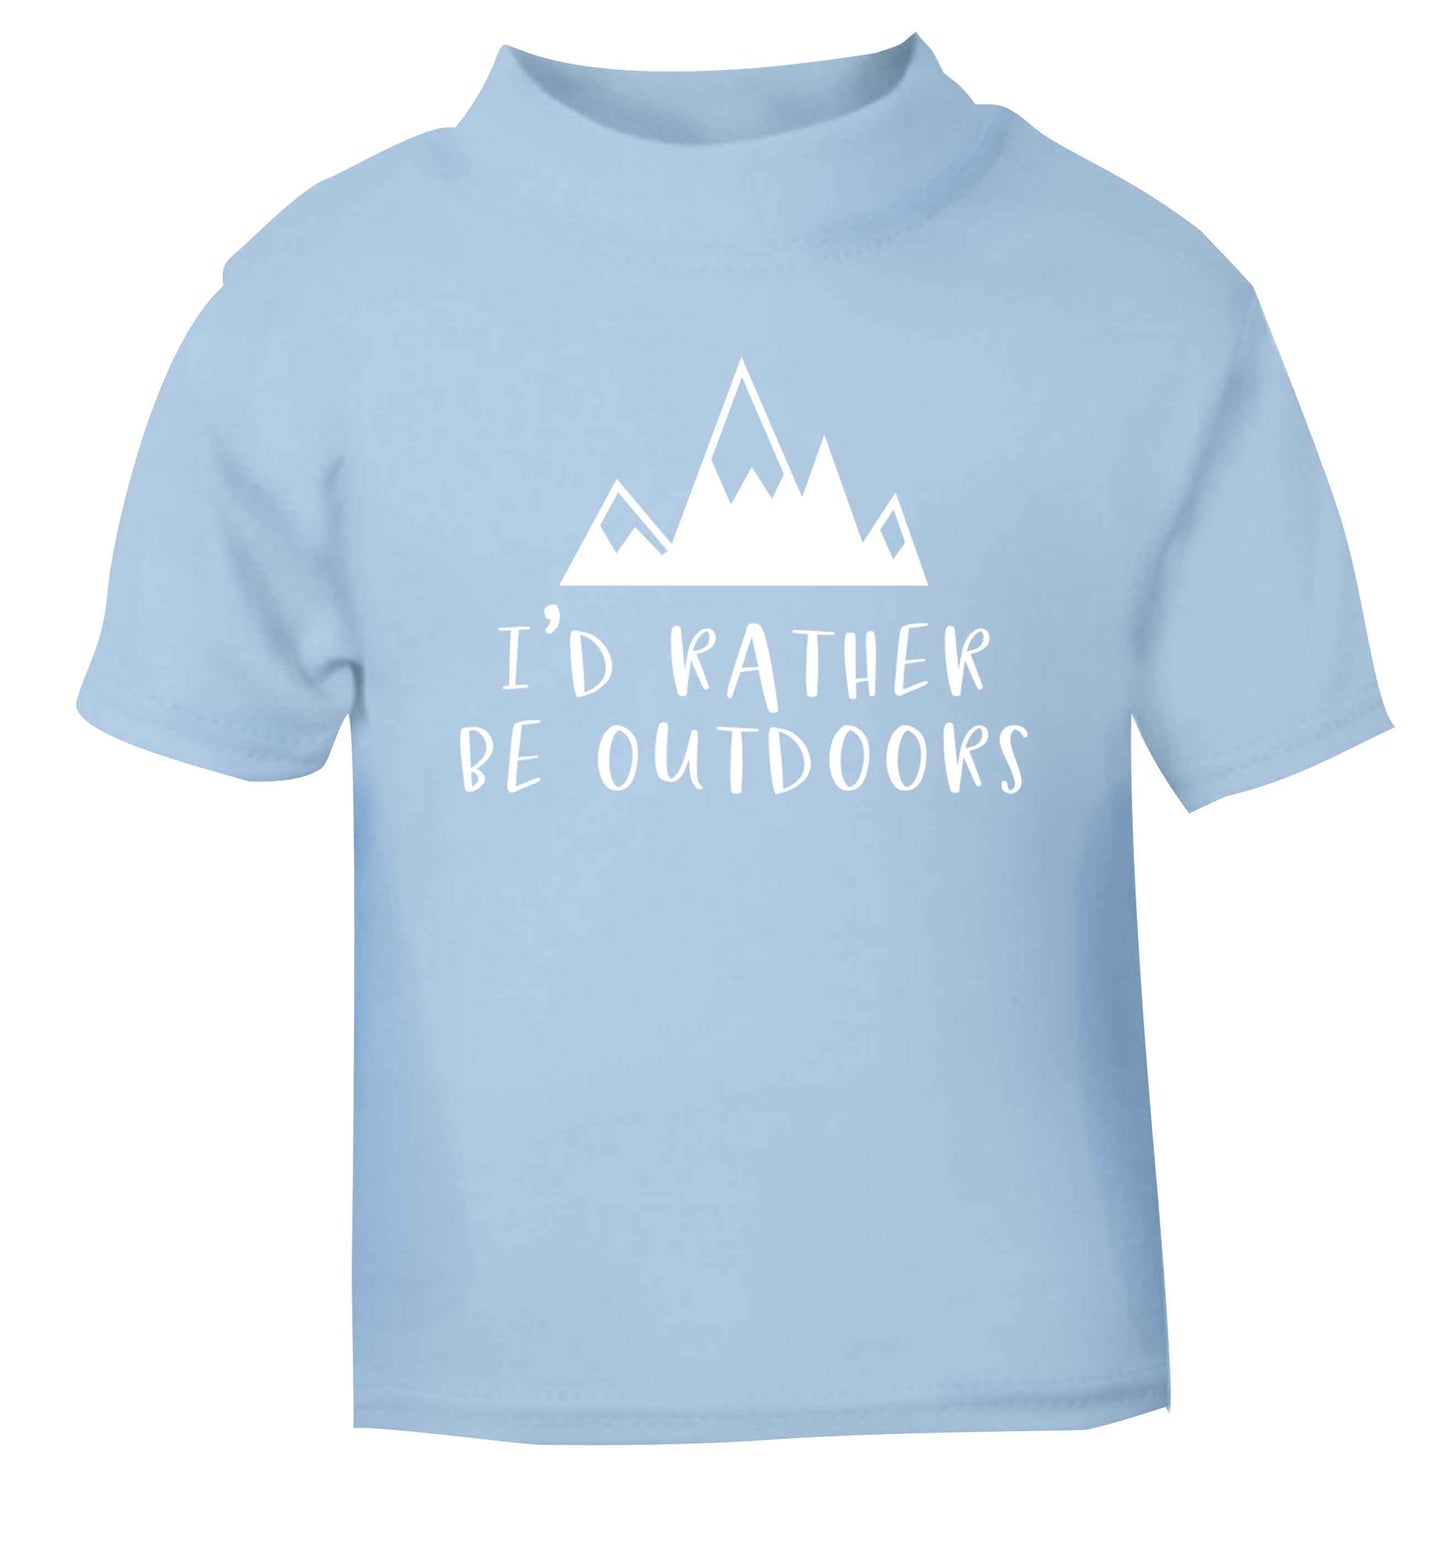 I'd rather be outdoors light blue Baby Toddler Tshirt 2 Years